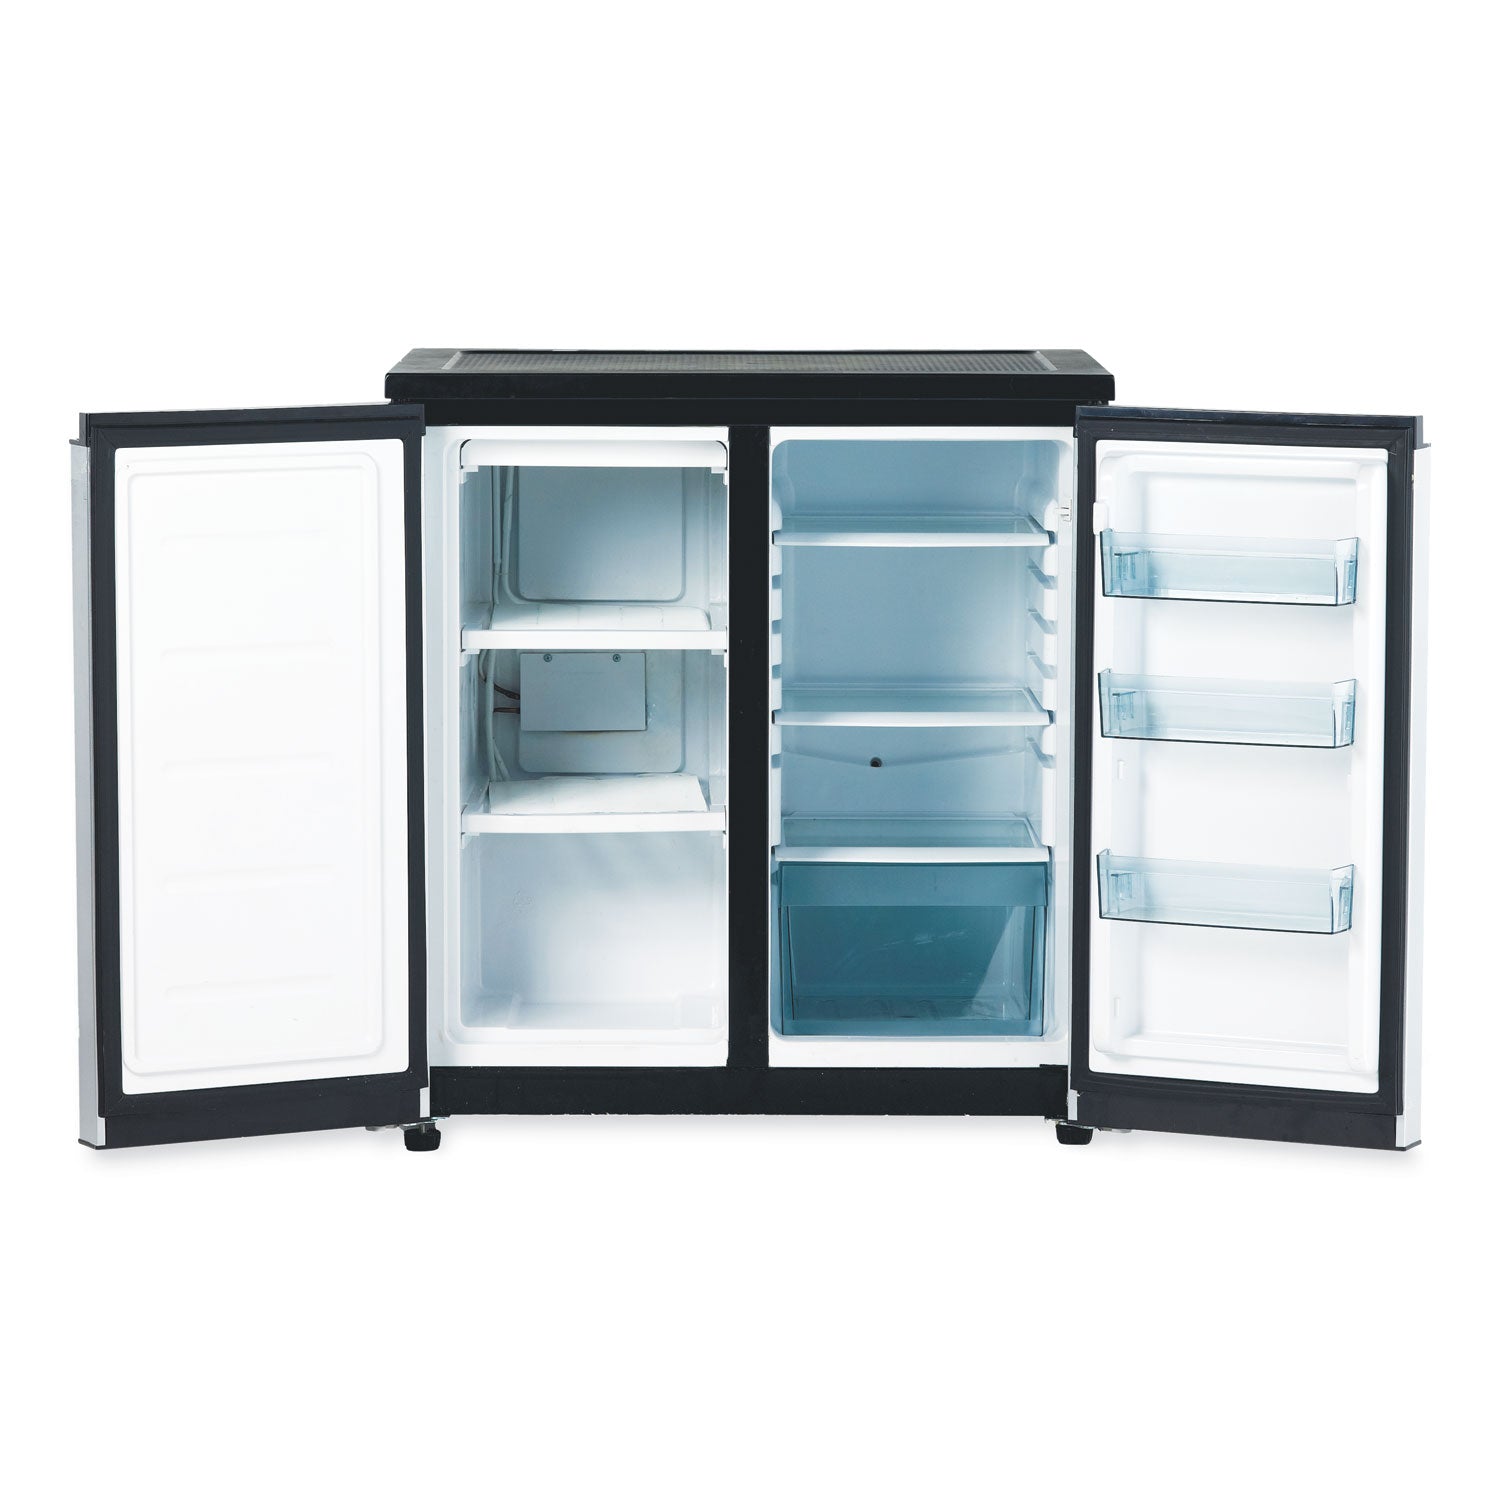 55-cf-side-by-side-refrigerator-freezer-black-stainless-steel_avarms551ss - 2